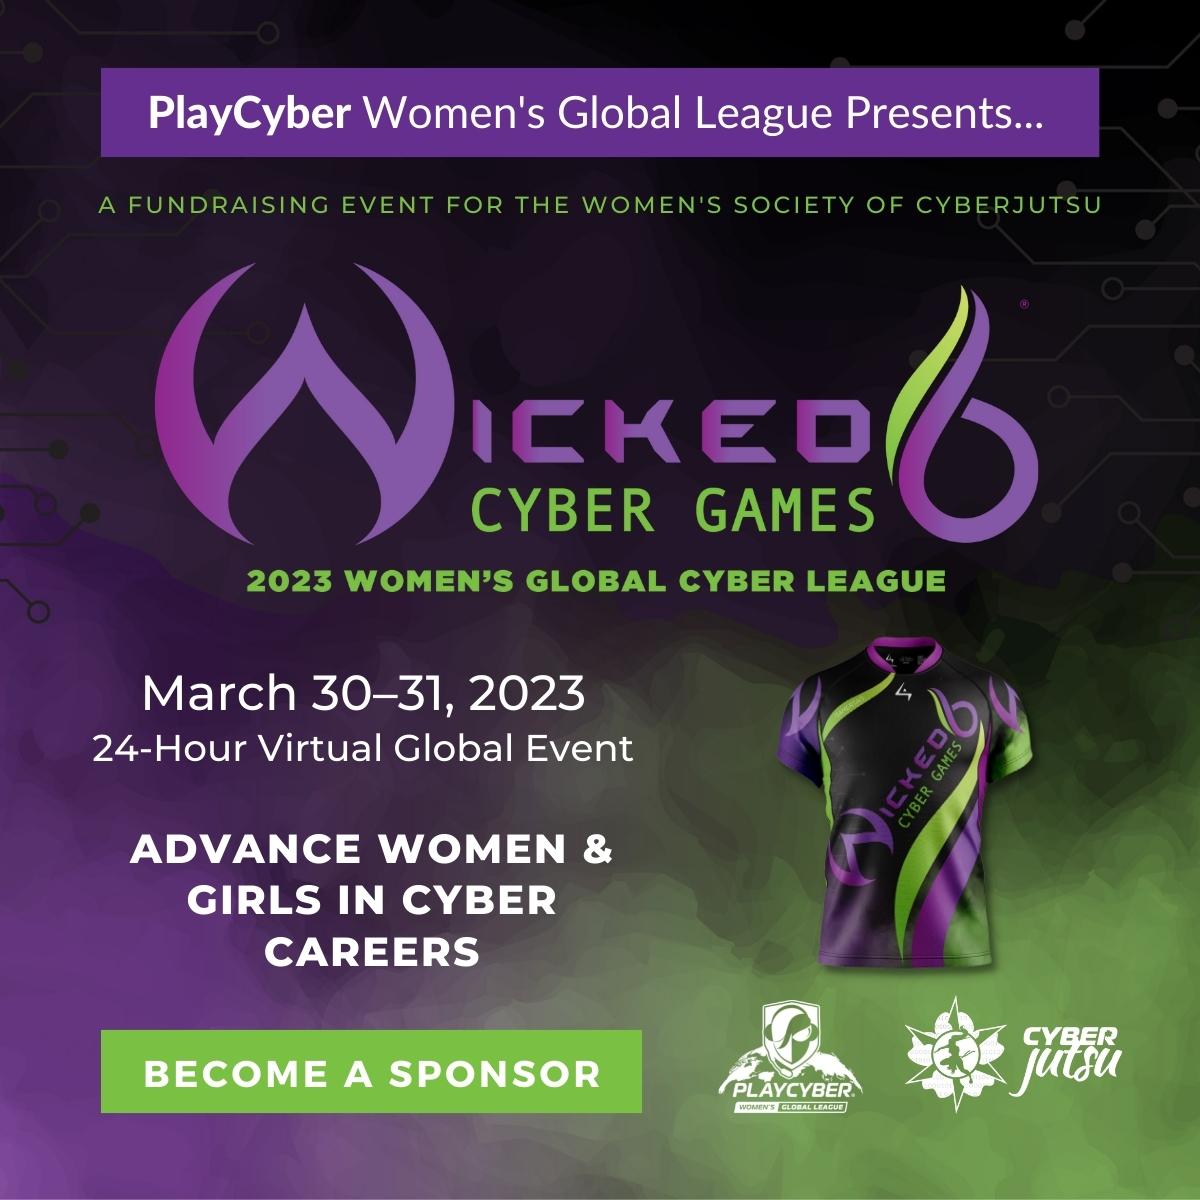 SPONSOR WICKED6 - Updated for 2023-2